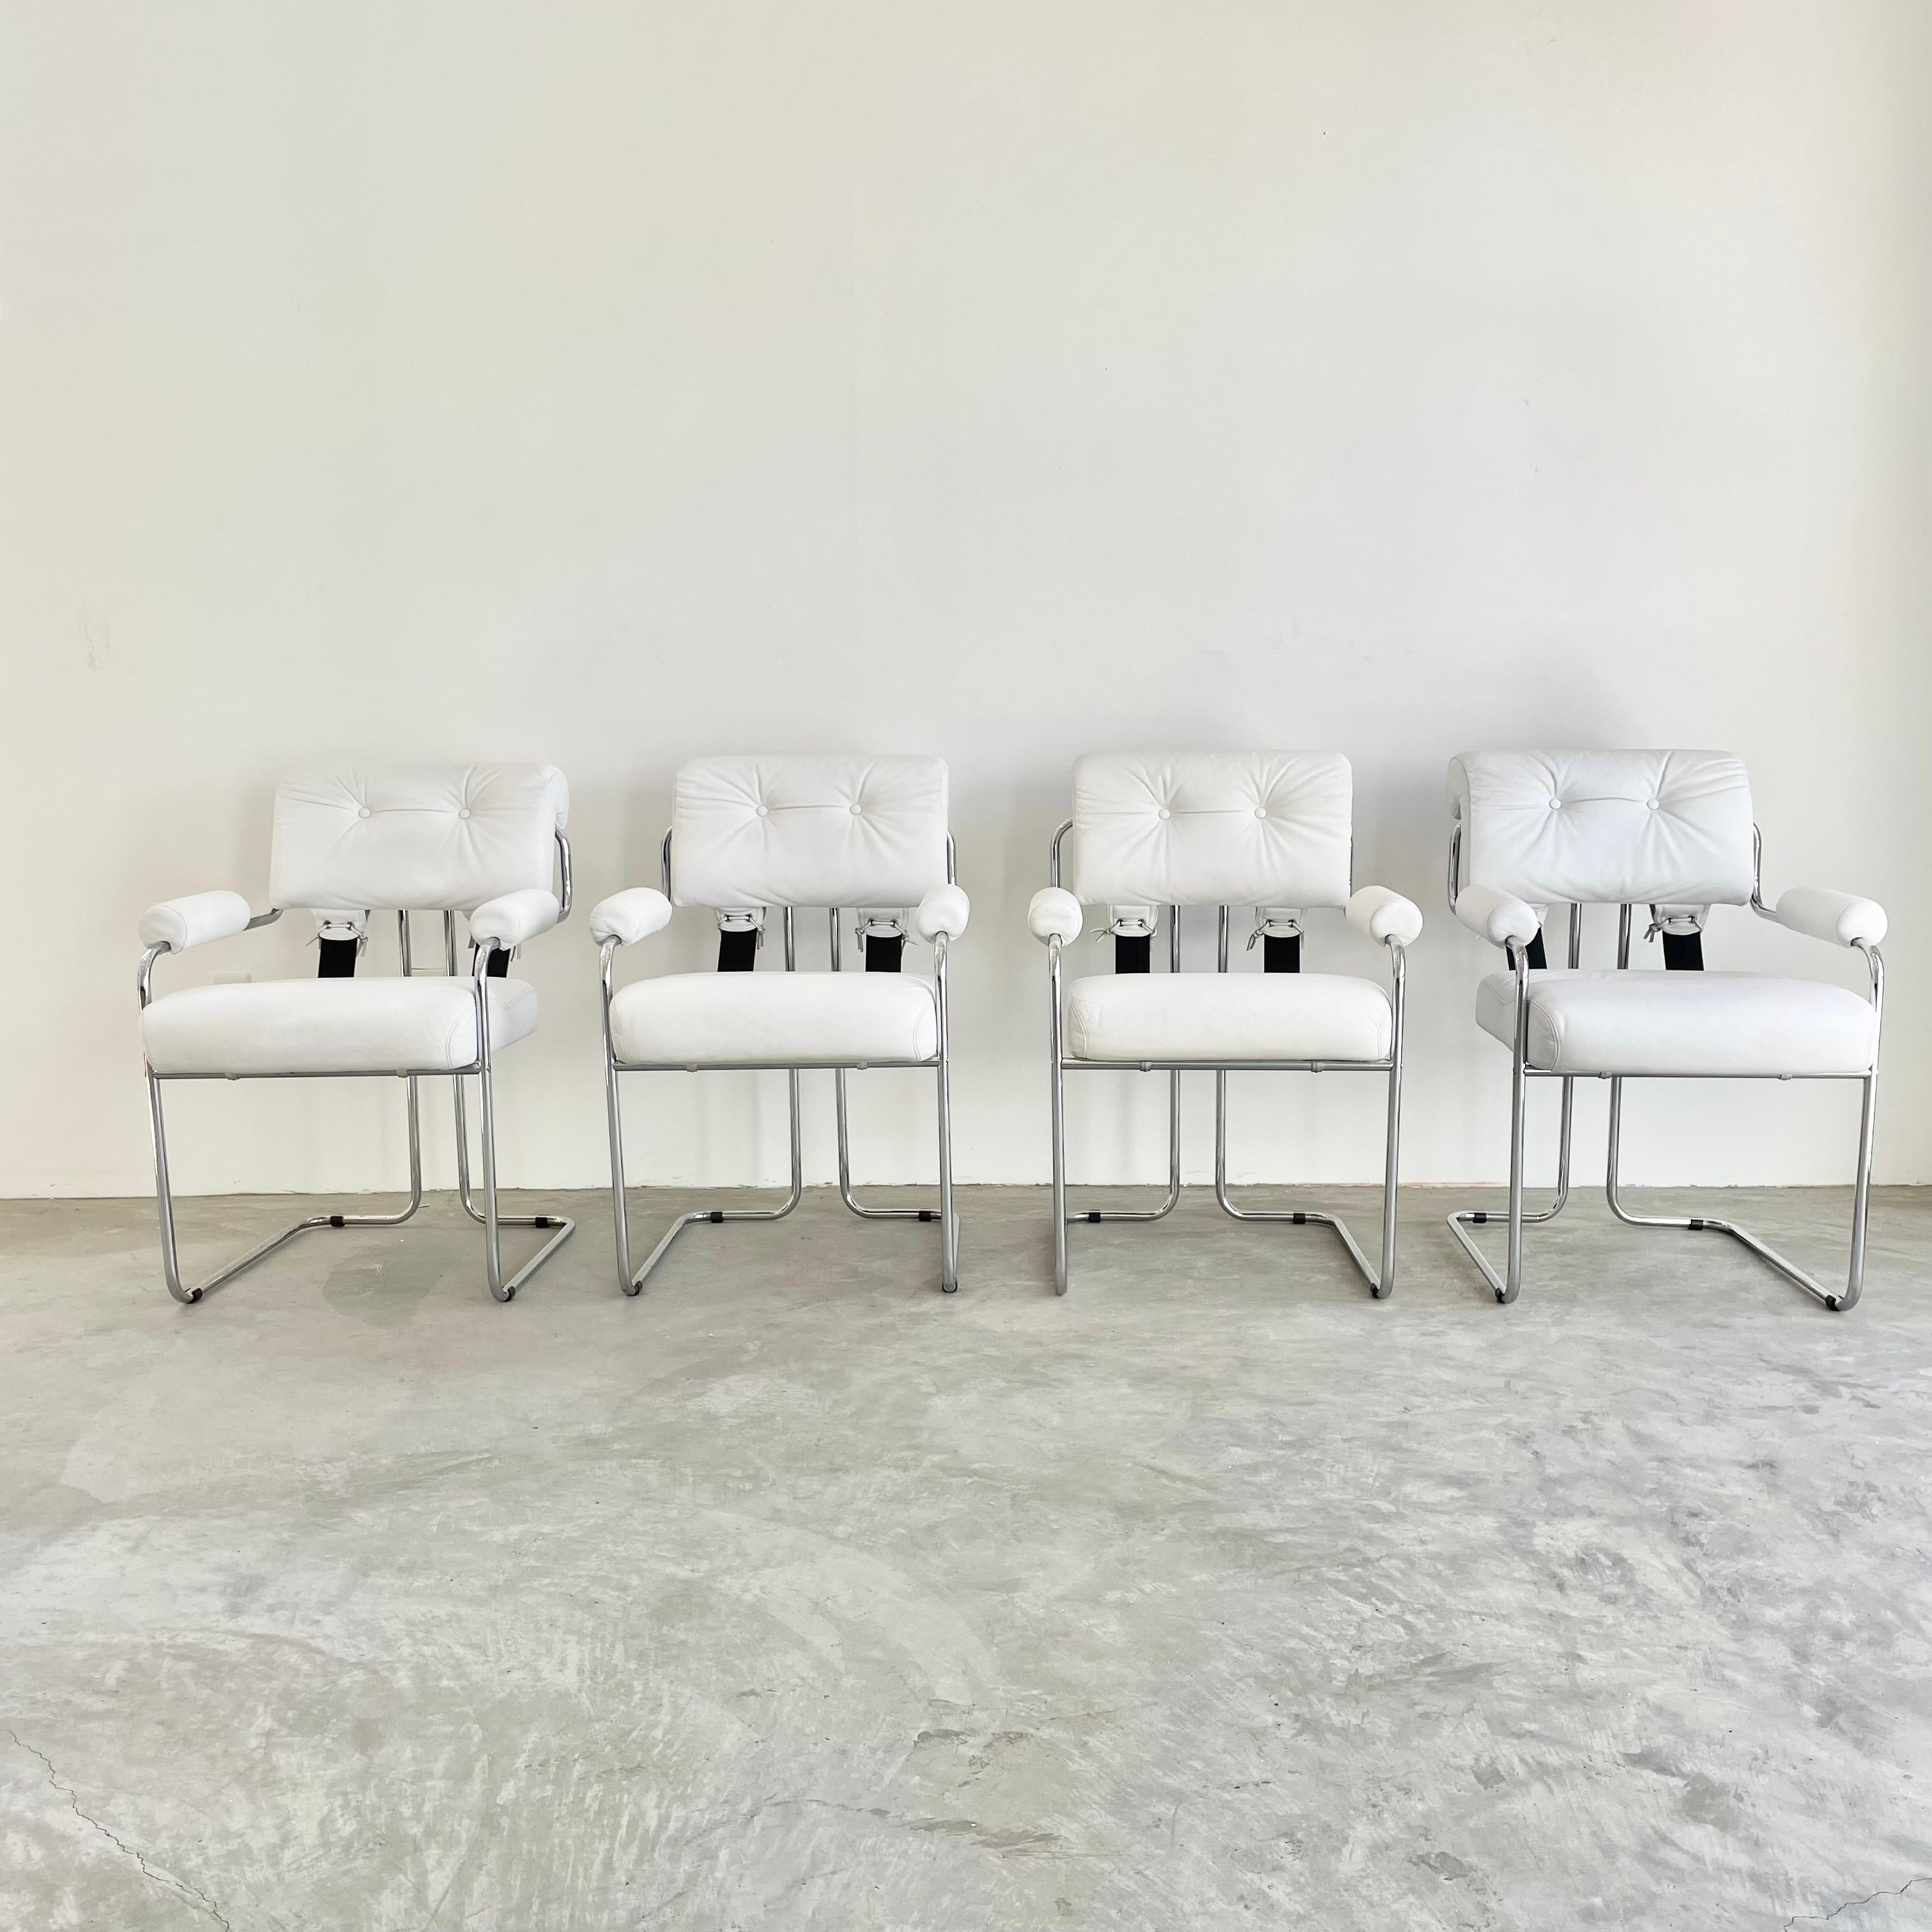 Stunning set of leather chairs by Guido Faleschini for Mariani, Pace. Unusual set in that they all have leather armrests. Chairs with white leather seat, seat back and armrests. Thick black leather straps fasten the seat back to the seat. Great